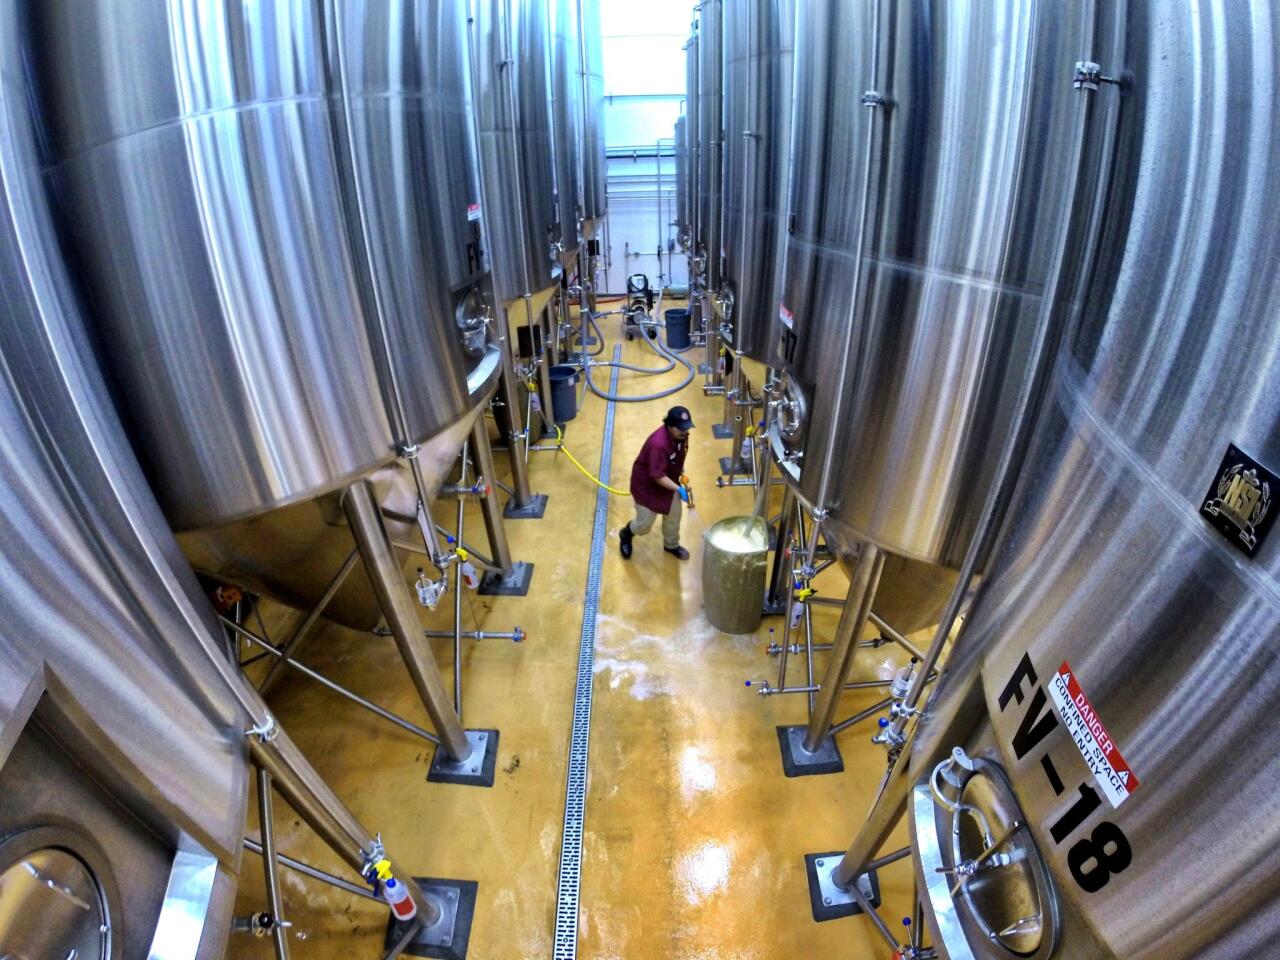 Cellarman Tony Chacon works on tank prep in the brewhouse at Brew Hub, the new state-of-the-art, 50,000-square-foot beer brewing co-op, in Lakeland, Fla. Wednesday, March 11, 2015. (Joe Burbank/Orlando Sentinel) B584463658Z.1